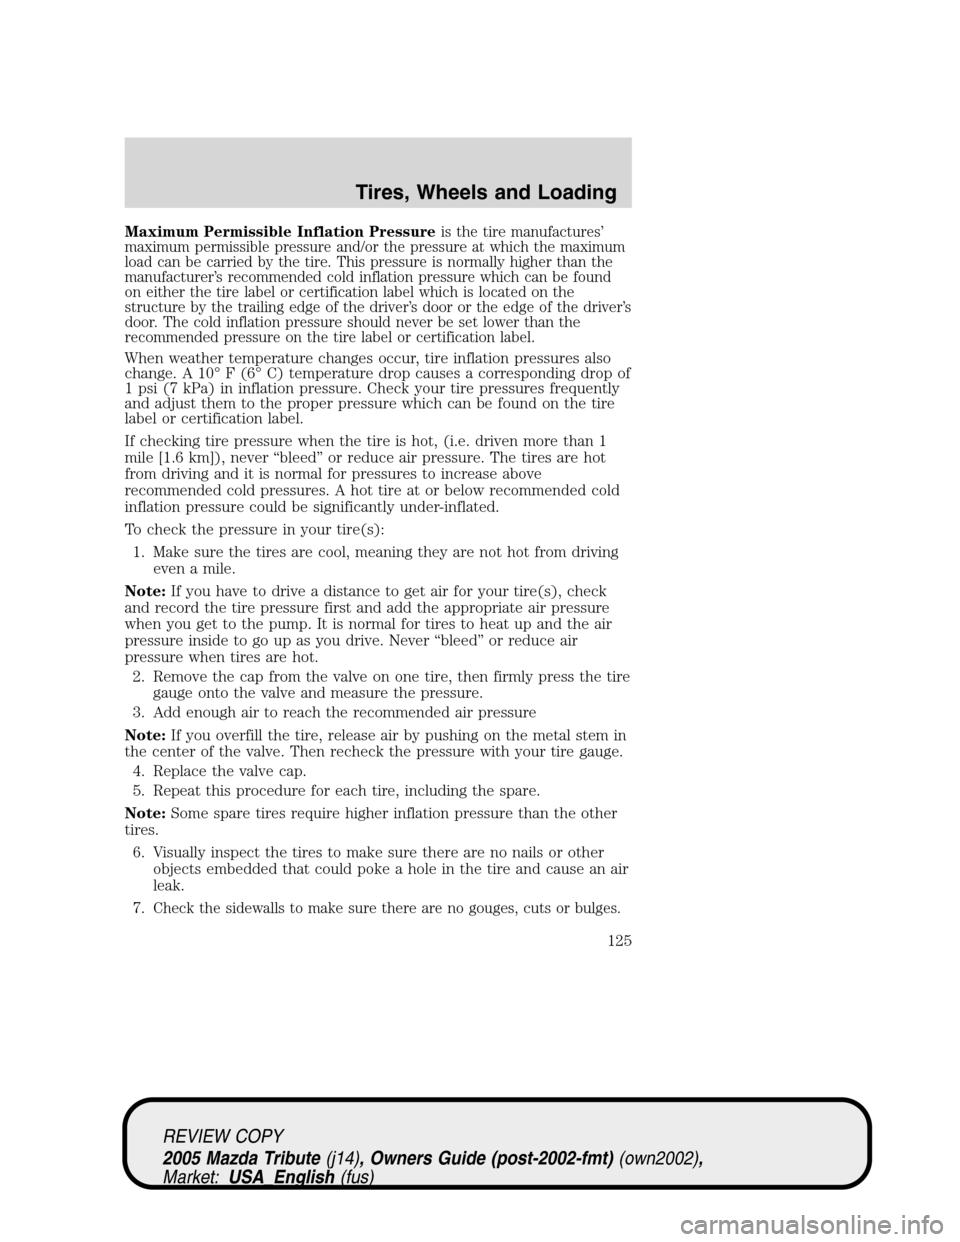 MAZDA MODEL TRIBUTE 2005  Owners Manual (in English) Maximum Permissible Inflation Pressureis the tire manufactures’
maximum permissible pressure and/or the pressure at which the maximum
load can be carried by the tire. This pressure is normally highe